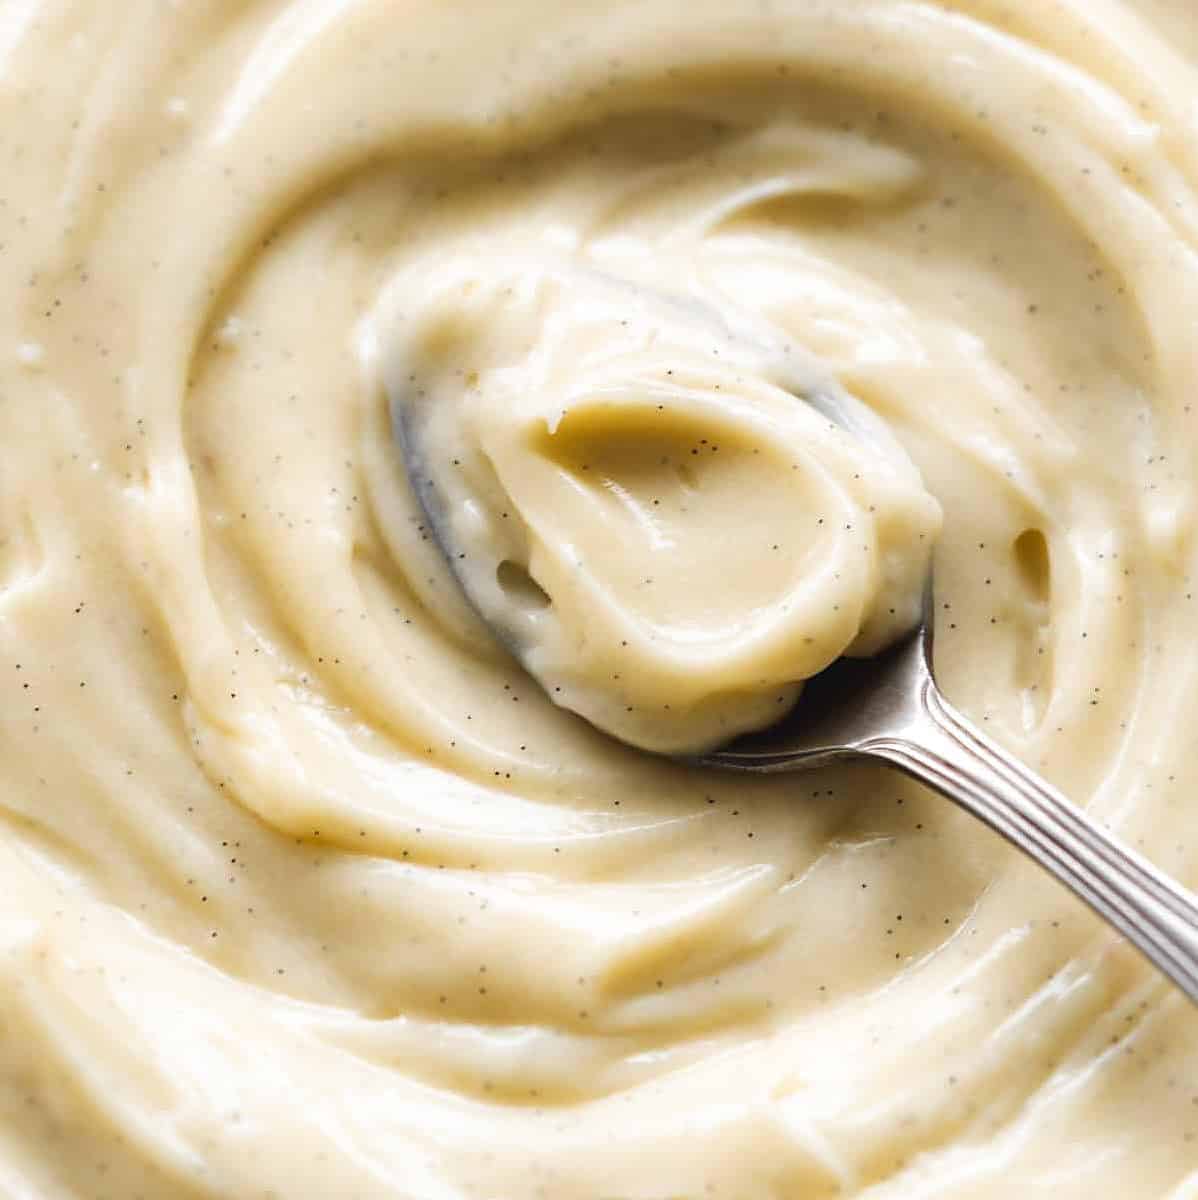  Create layers of flavors and impress your guests with this simple vegan pastry cream